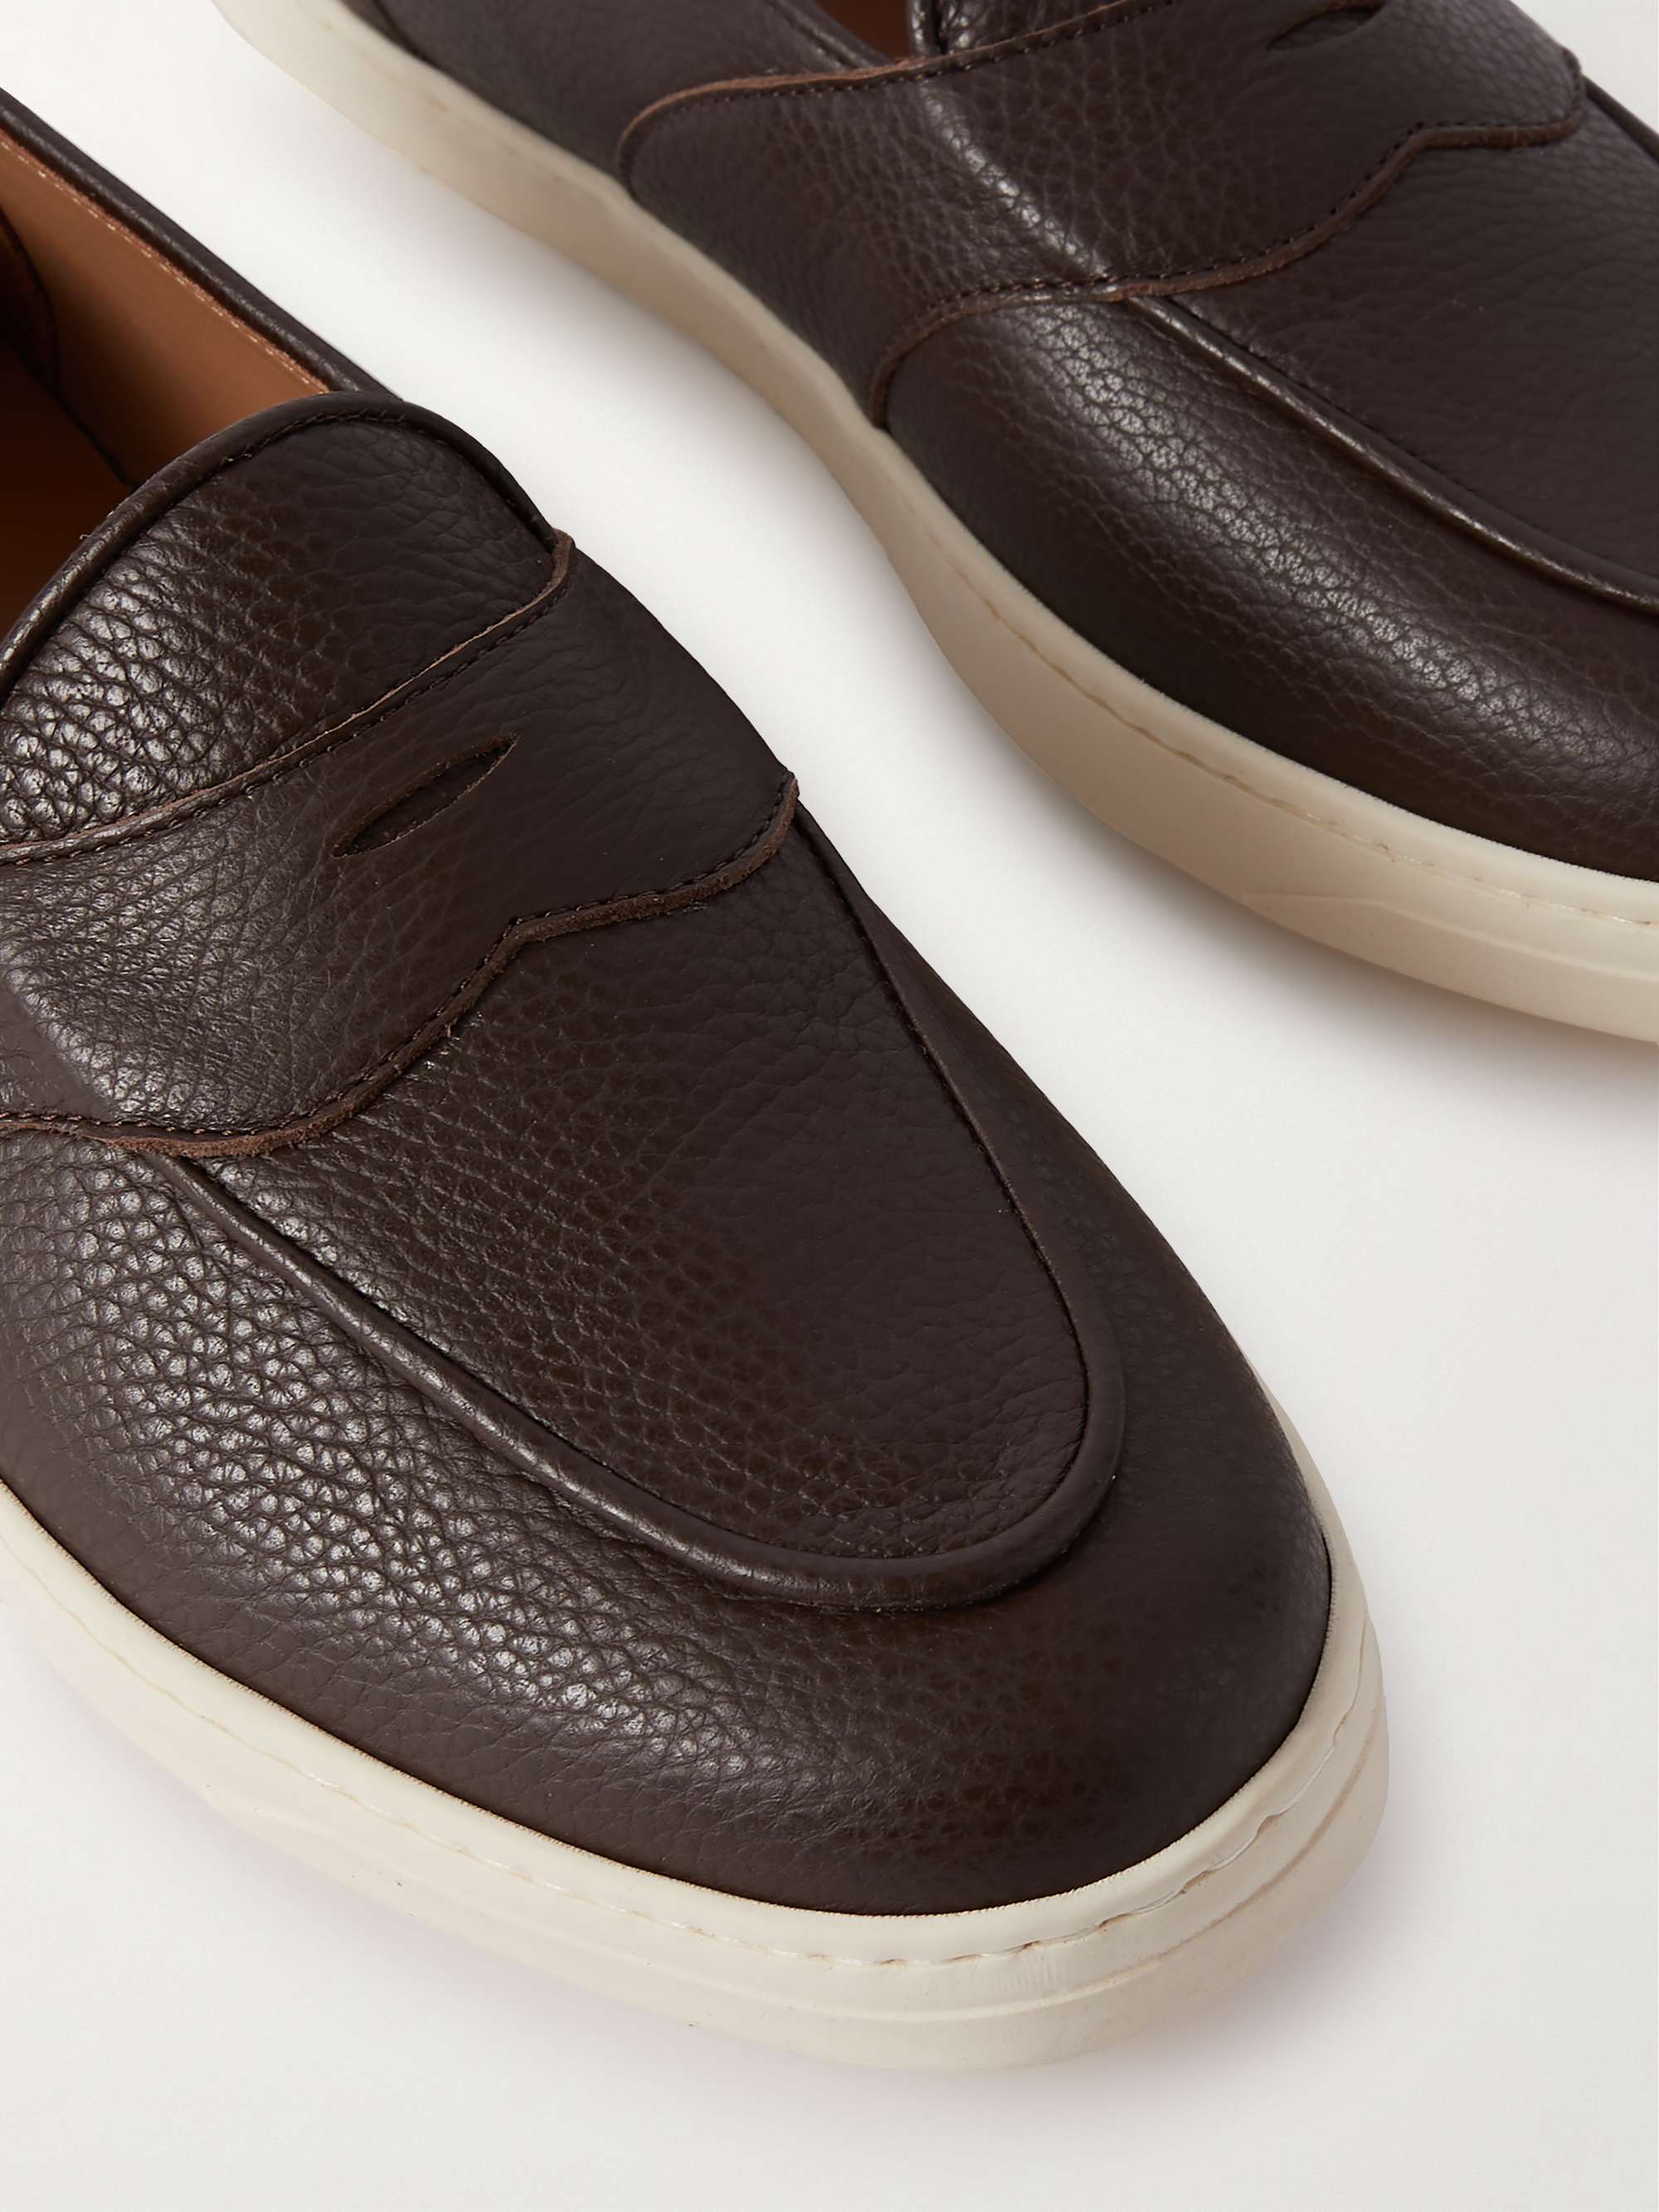 GEORGE CLEVERLEY Joey Full-Grain Leather Penny Loafers | MR PORTER